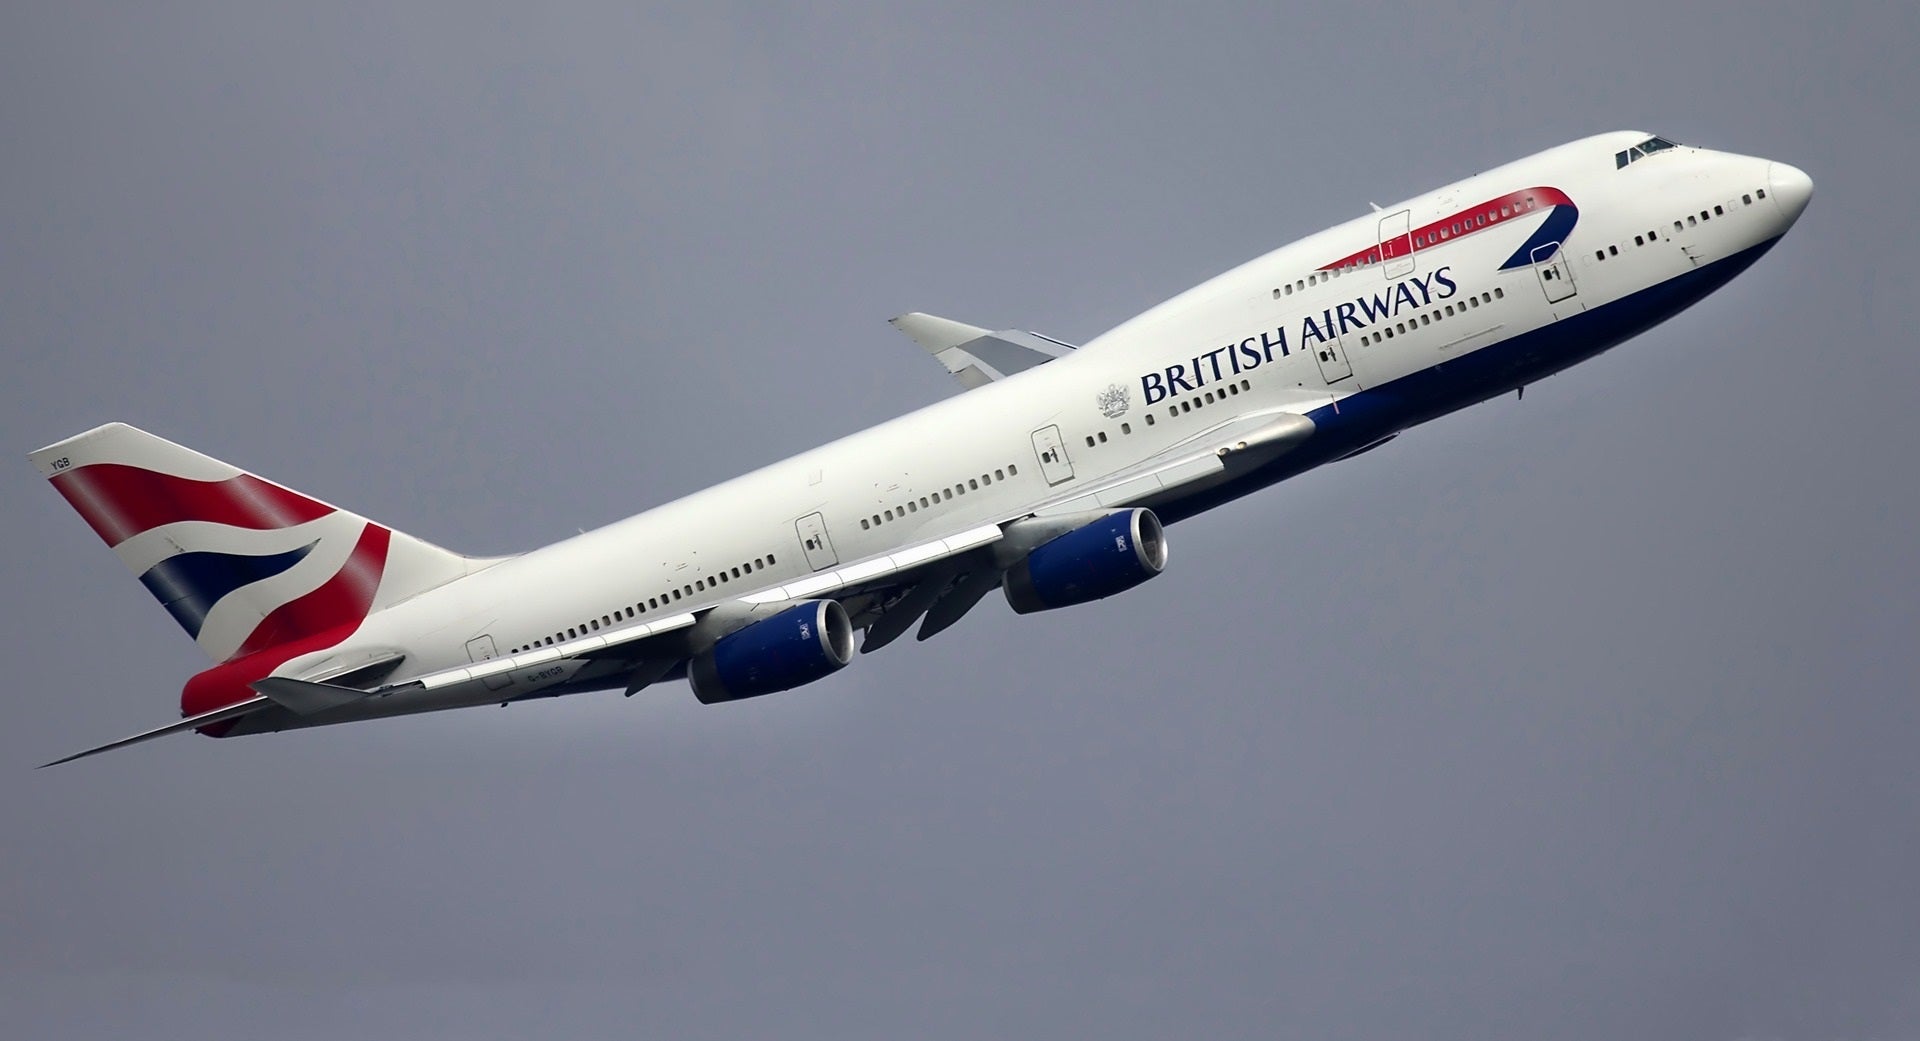 British Airways to test digital queuing technology from Qmatic